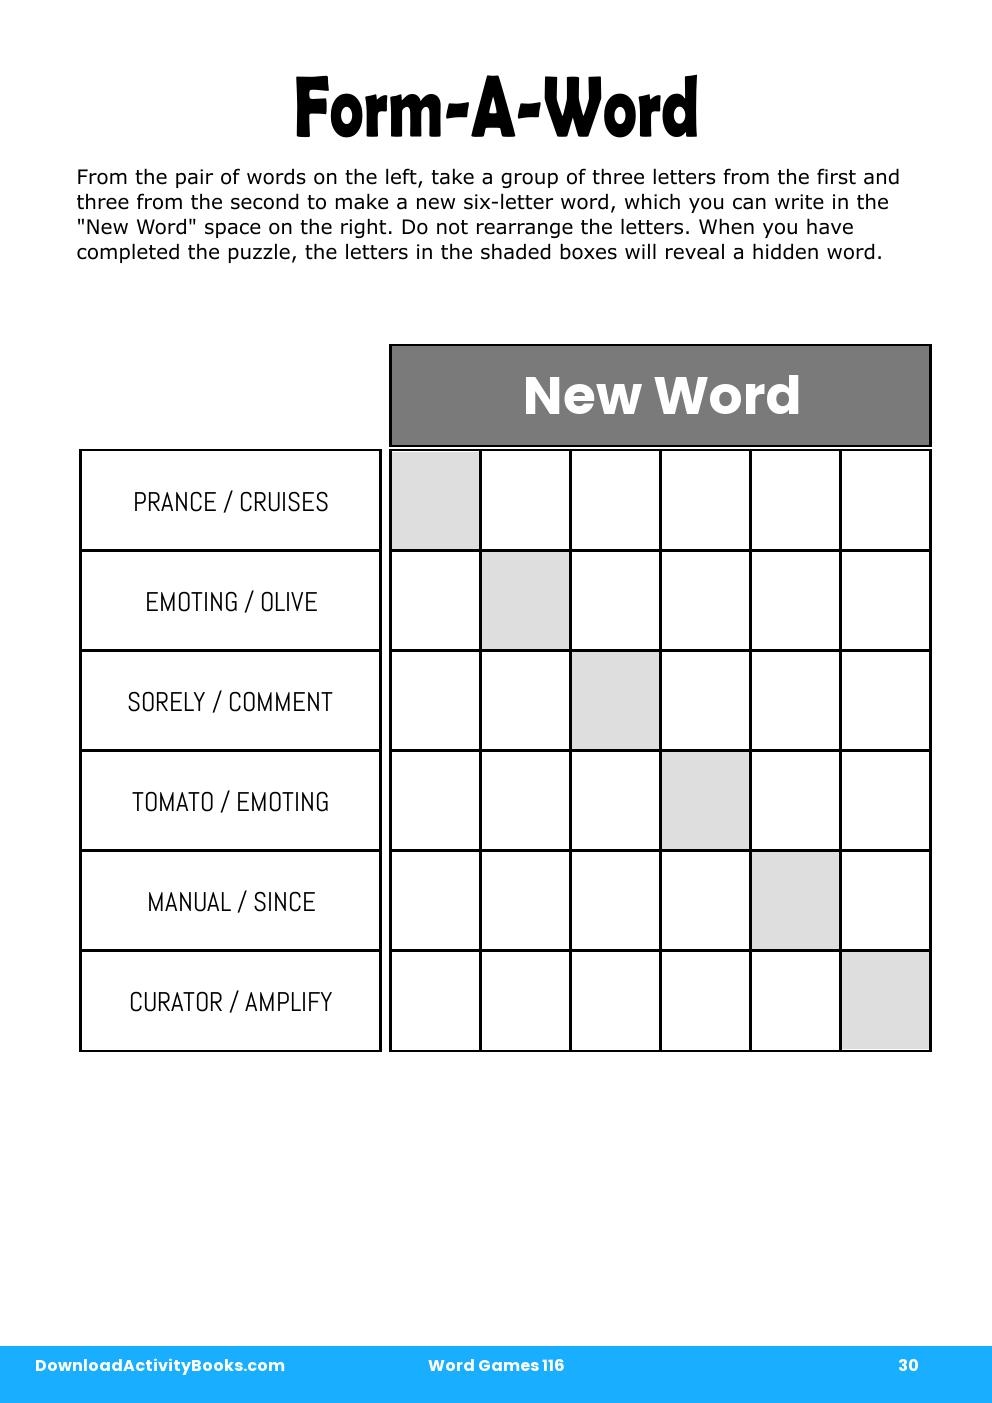 Form-A-Word in Word Games 116